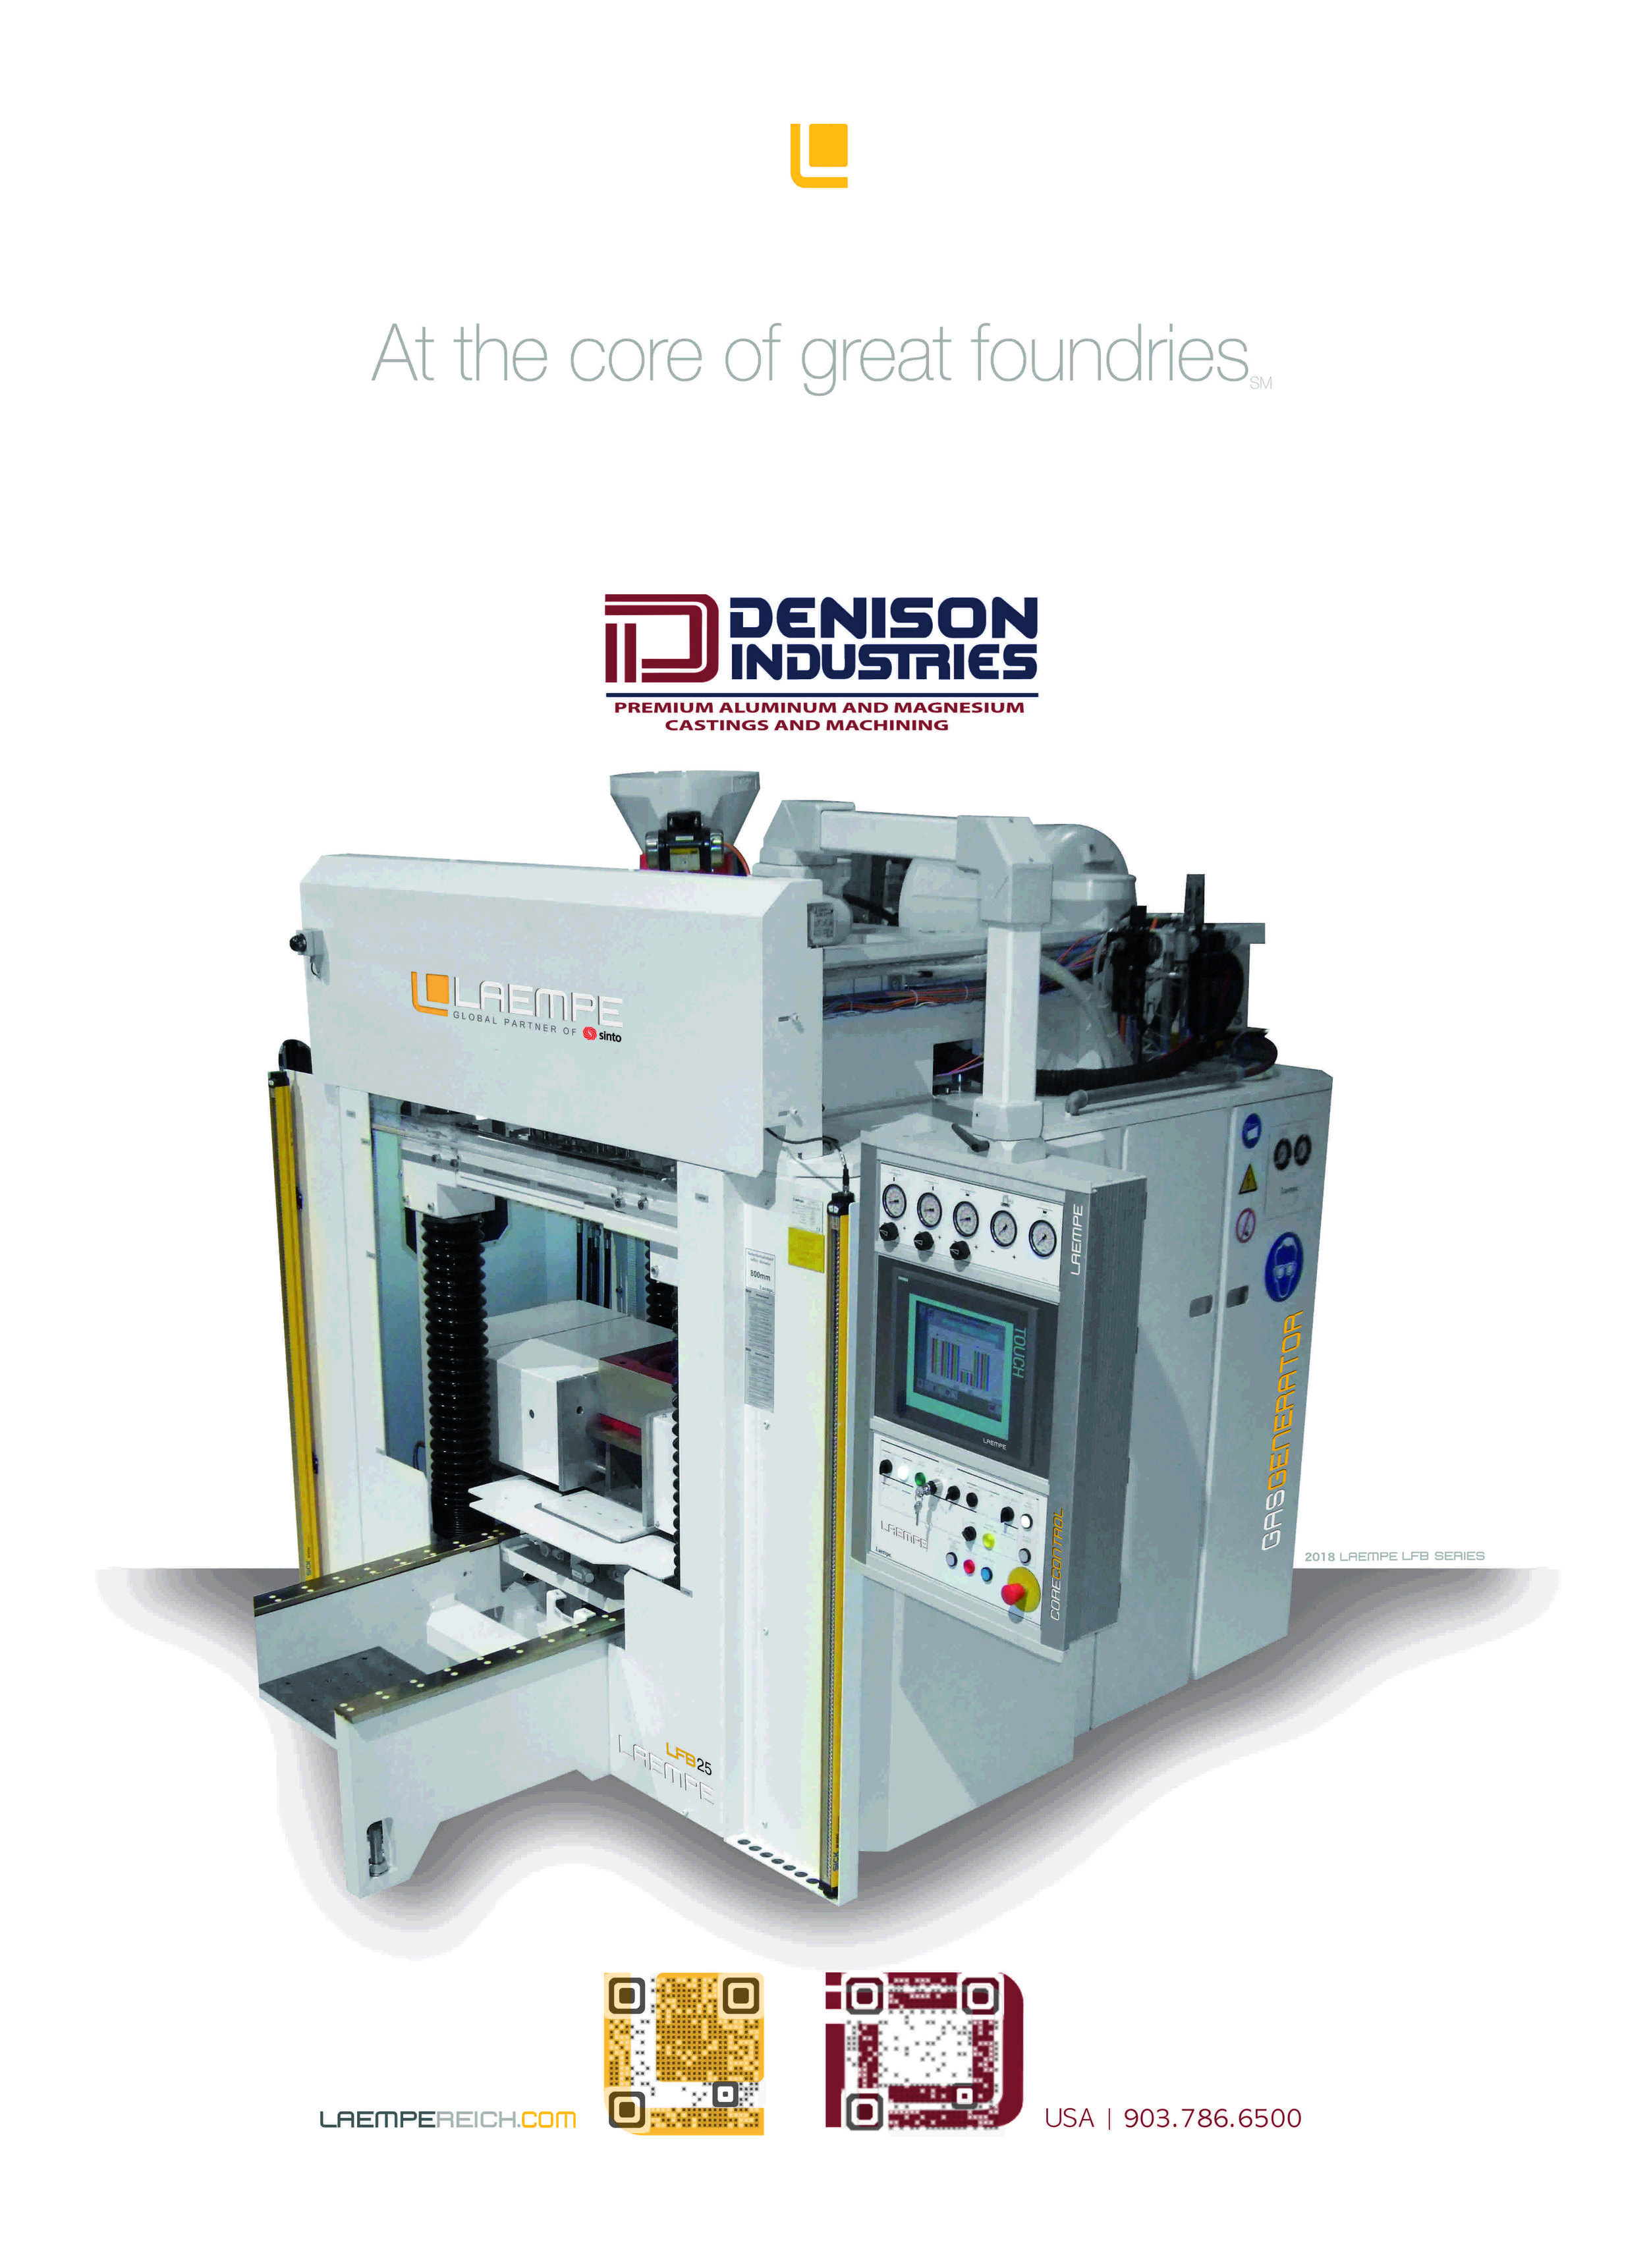 Denison Industries | At the Core of Great Foundries 2017.jpg